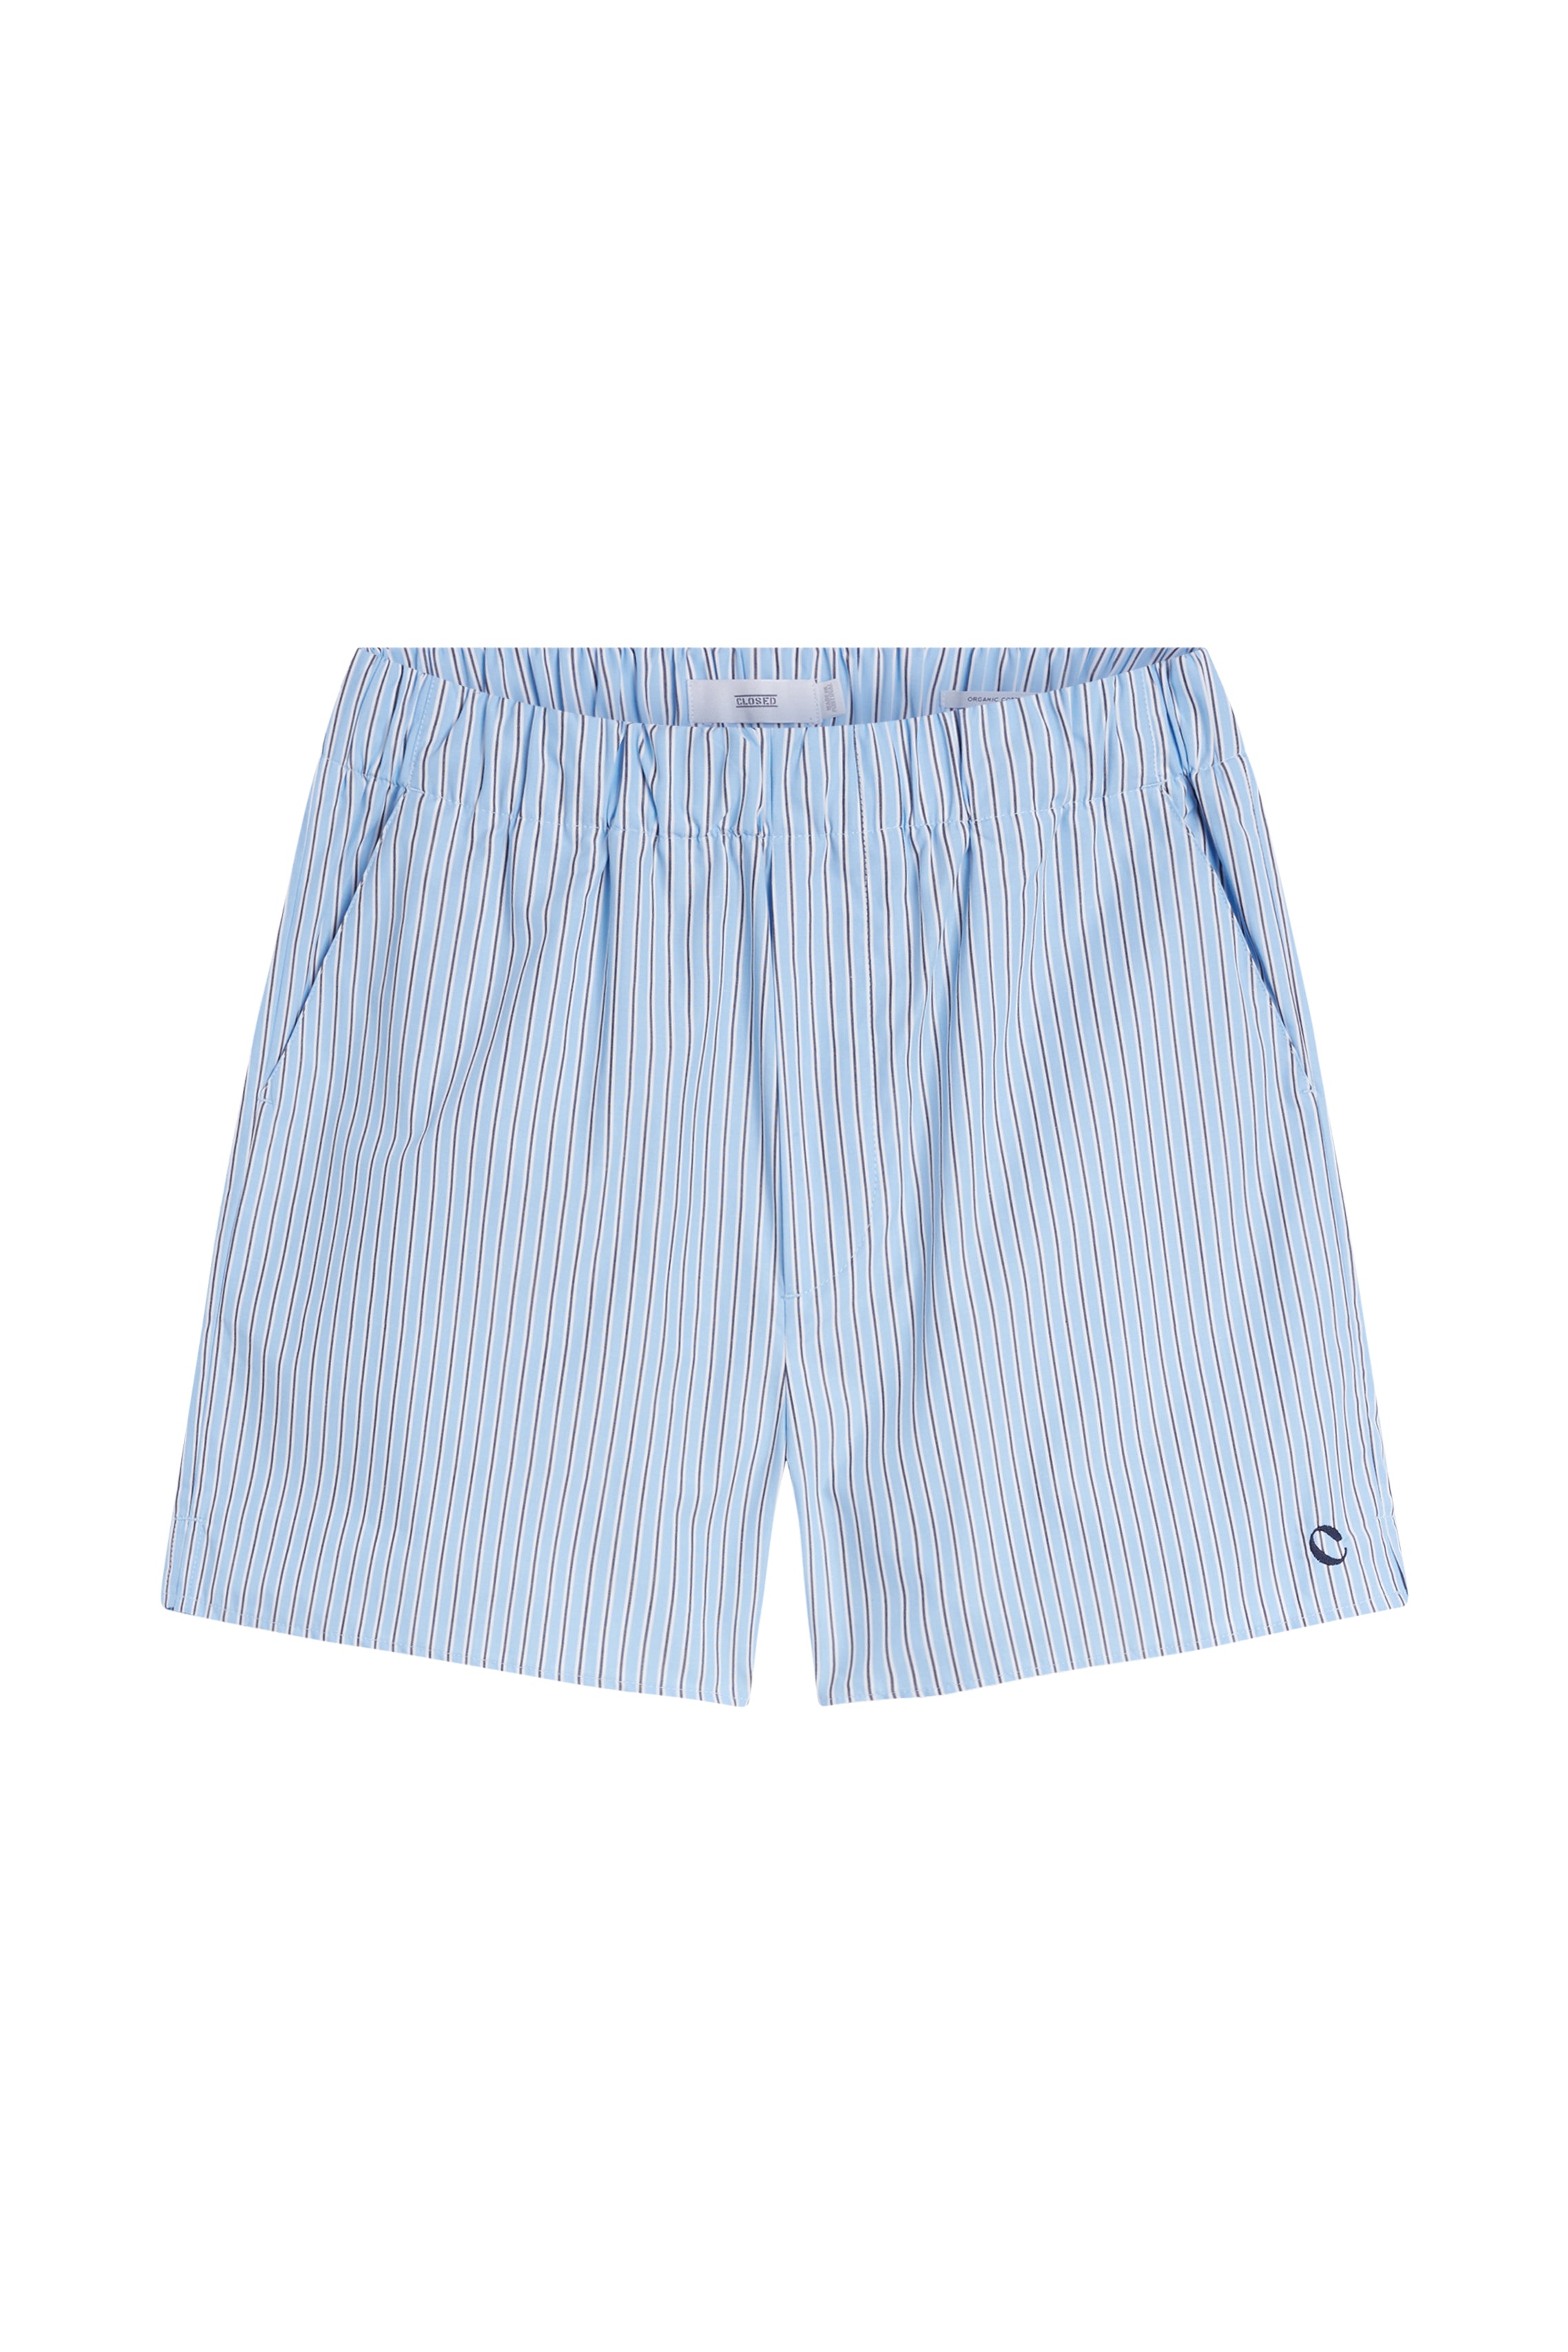 CLOSED-OUTLET-SALE-BOXER-SHORTS-Hosen-ARCHIVE-COLLECTION-4.jpg